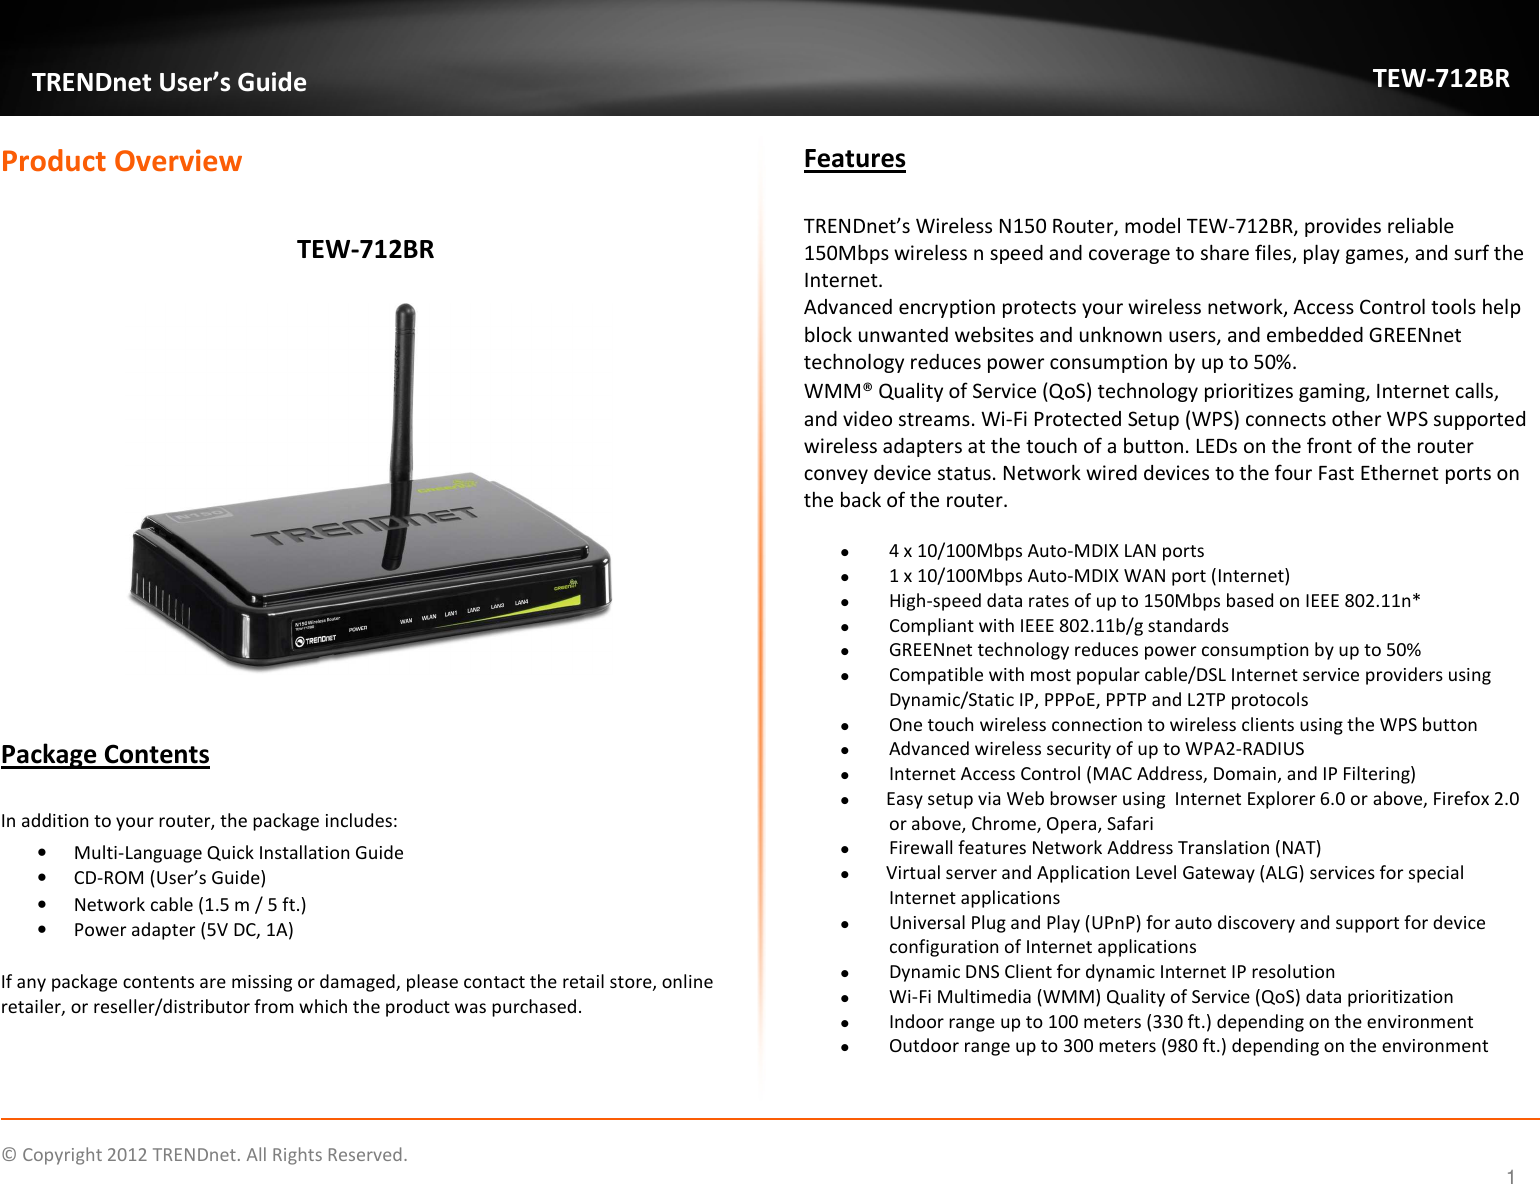              © Copyright 2012 TRENDnet. All Rights Reserved.       TRENDnet User’s Guide TEW-712BR 1 Product Overview  TEW-712BR              Package Contents  In addition to your router, the package includes: • Multi-Language Quick Installation Guide • CD-ROM (User’s Guide) • Network cable (1.5 m / 5 ft.) • Power adapter (5V DC, 1A)  If any package contents are missing or damaged, please contact the retail store, online retailer, or reseller/distributor from which the product was purchased. Features  TRENDnet’s Wireless N150 Router, model TEW-712BR, provides reliable 150Mbps wireless n speed and coverage to share files, play games, and surf the Internet.  Advanced encryption protects your wireless network, Access Control tools help block unwanted websites and unknown users, and embedded GREENnet technology reduces power consumption by up to 50%.  WMM® Quality of Service (QoS) technology prioritizes gaming, Internet calls, and video streams. Wi-Fi Protected Setup (WPS) connects other WPS supported wireless adapters at the touch of a button. LEDs on the front of the router convey device status. Network wired devices to the four Fast Ethernet ports on the back of the router.   4 x 10/100Mbps Auto-MDIX LAN ports   1 x 10/100Mbps Auto-MDIX WAN port (Internet)  High-speed data rates of up to 150Mbps based on IEEE 802.11n*   Compliant with IEEE 802.11b/g standards  GREENnet technology reduces power consumption by up to 50%  Compatible with most popular cable/DSL Internet service providers using Dynamic/Static IP, PPPoE, PPTP and L2TP protocols  One touch wireless connection to wireless clients using the WPS button  Advanced wireless security of up to WPA2-RADIUS  Internet Access Control (MAC Address, Domain, and IP Filtering)  Easy setup via Web browser using  Internet Explorer 6.0 or above, Firefox 2.0 or above, Chrome, Opera, Safari  Firewall features Network Address Translation (NAT)  Virtual server and Application Level Gateway (ALG) services for special Internet applications   Universal Plug and Play (UPnP) for auto discovery and support for device configuration of Internet applications   Dynamic DNS Client for dynamic Internet IP resolution  Wi-Fi Multimedia (WMM) Quality of Service (QoS) data prioritization  Indoor range up to 100 meters (330 ft.) depending on the environment   Outdoor range up to 300 meters (980 ft.) depending on the environment  